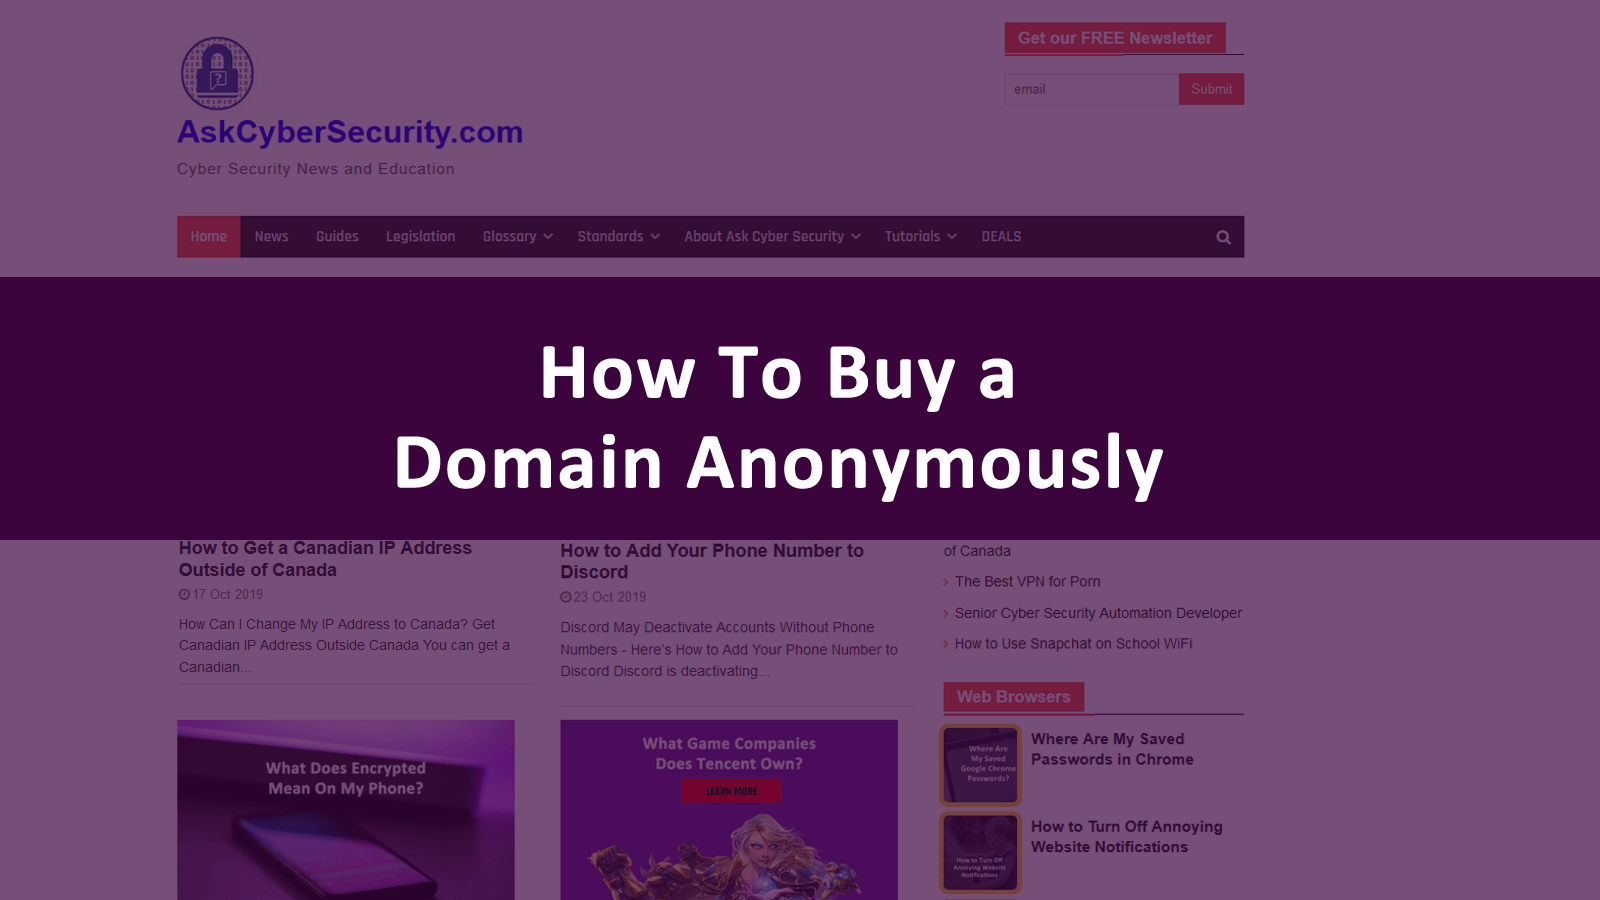 How To Buy a Domain Anonymously